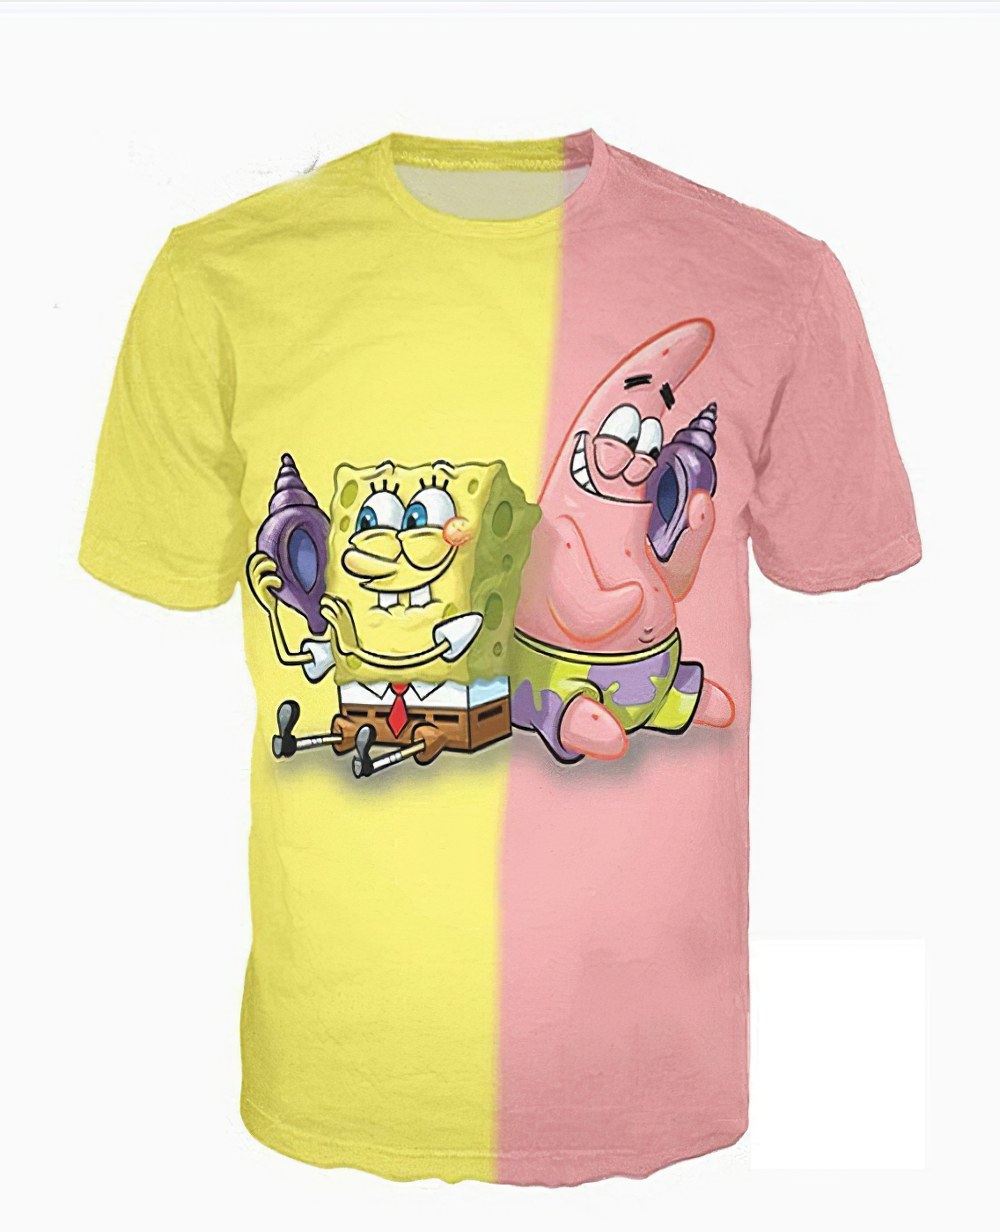 Gangster Spongebob Playing With Snail Shells 3d Shirt Size Up To 5xl